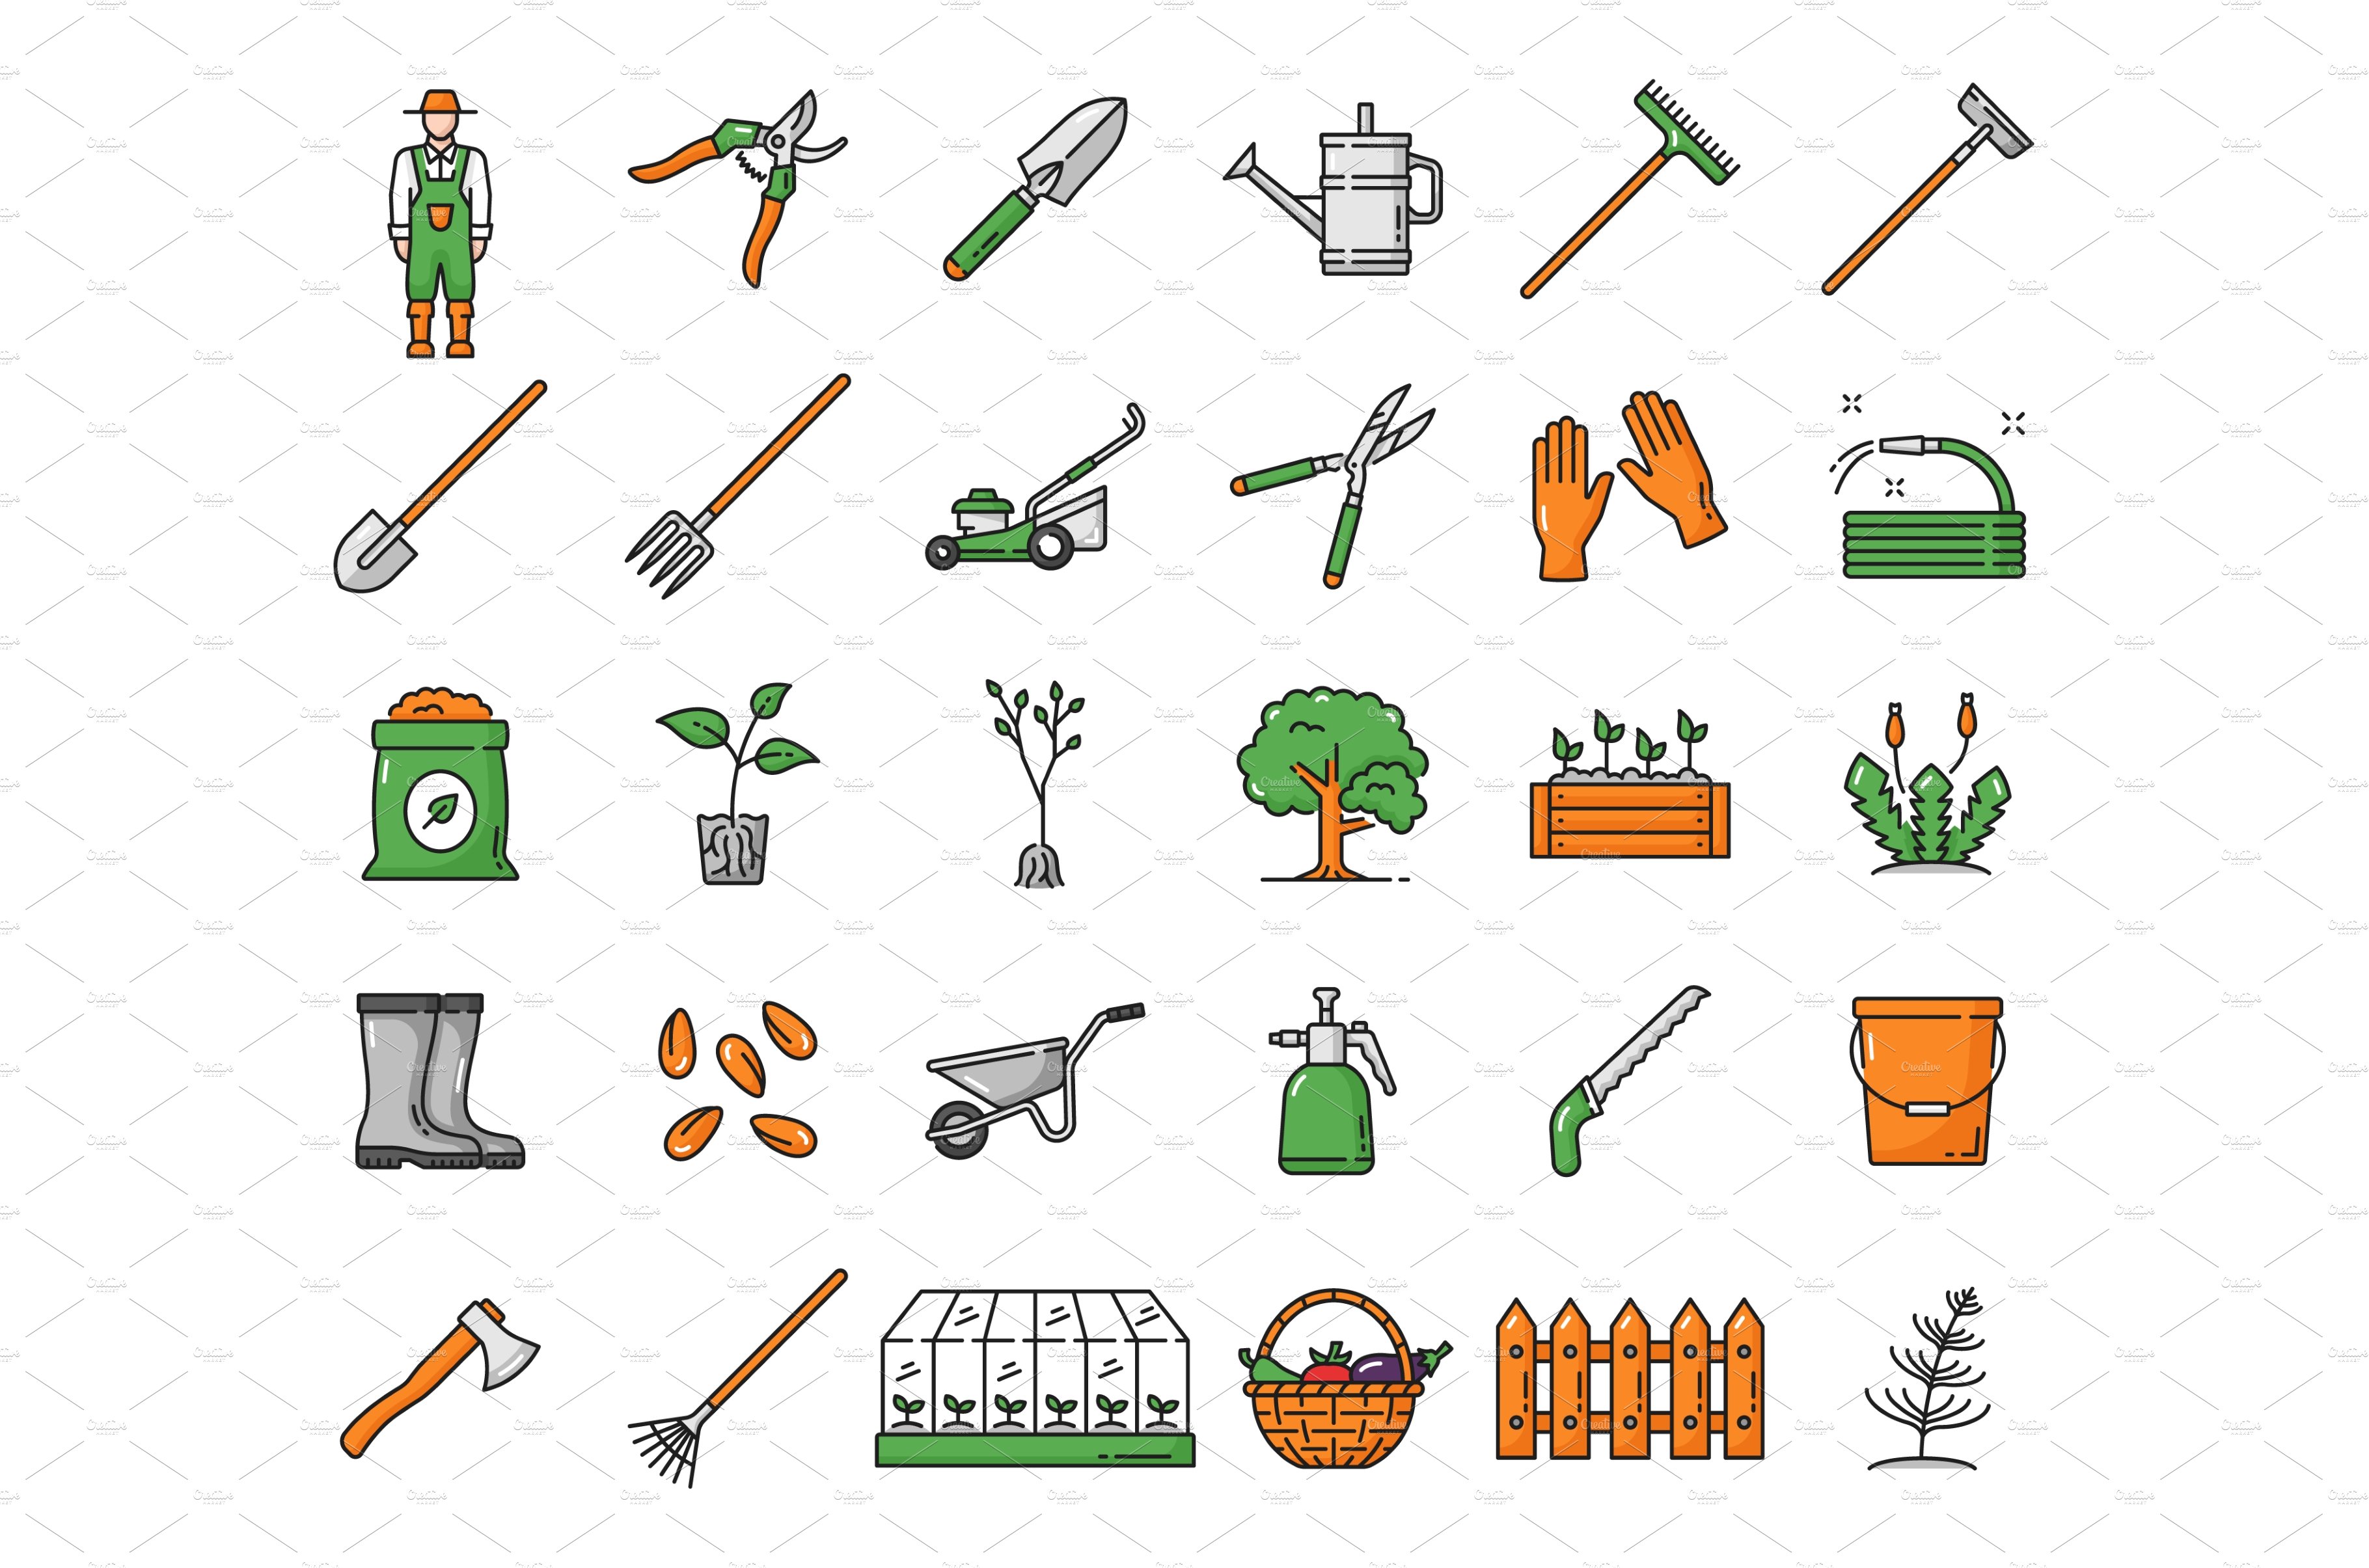 Agriculture farming, gardening tools cover image.